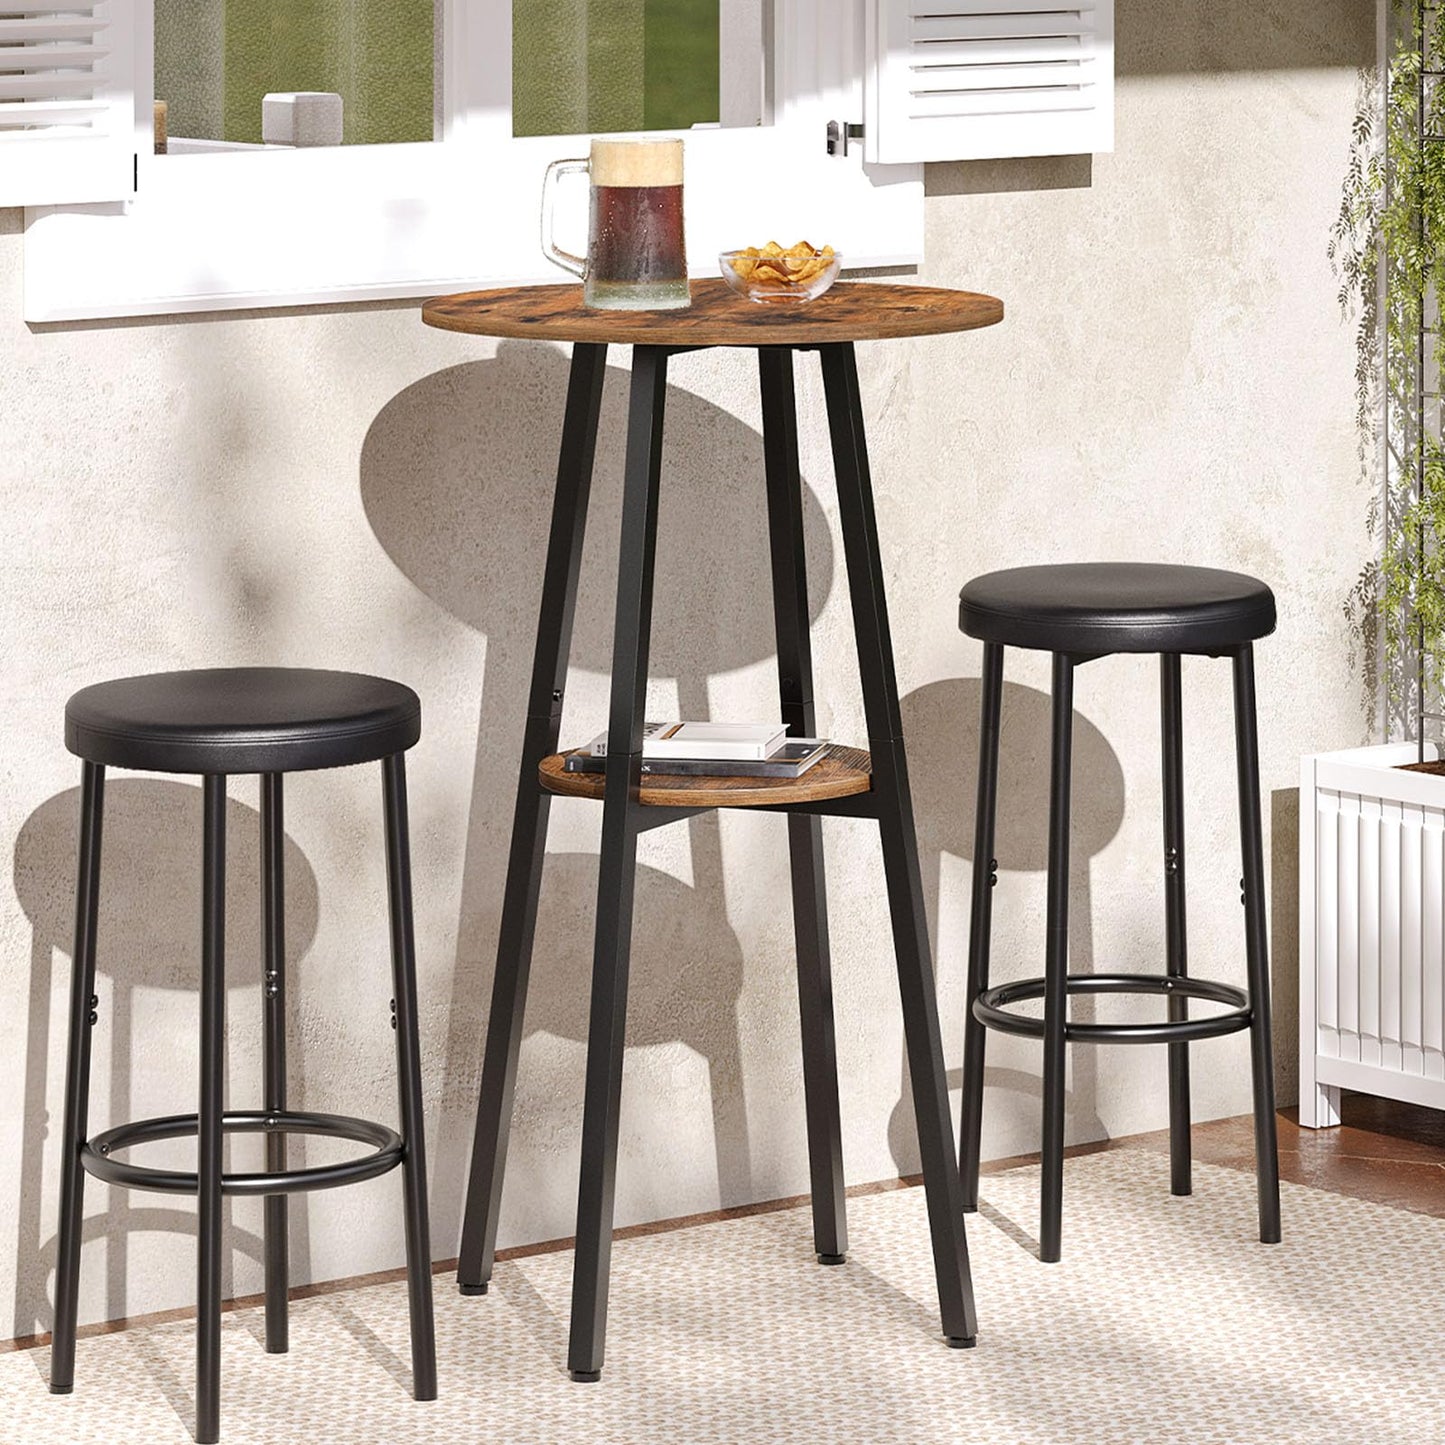 HOOBRO Bar Table, Round Pub Table, 2-Tier Bistro Table with Storage, 37.4" High Top Table for Small Spaces, Cocktail Table with Top Particleboard for Kitchen, Easy to Assemble, Rustic Brown BF55BT01